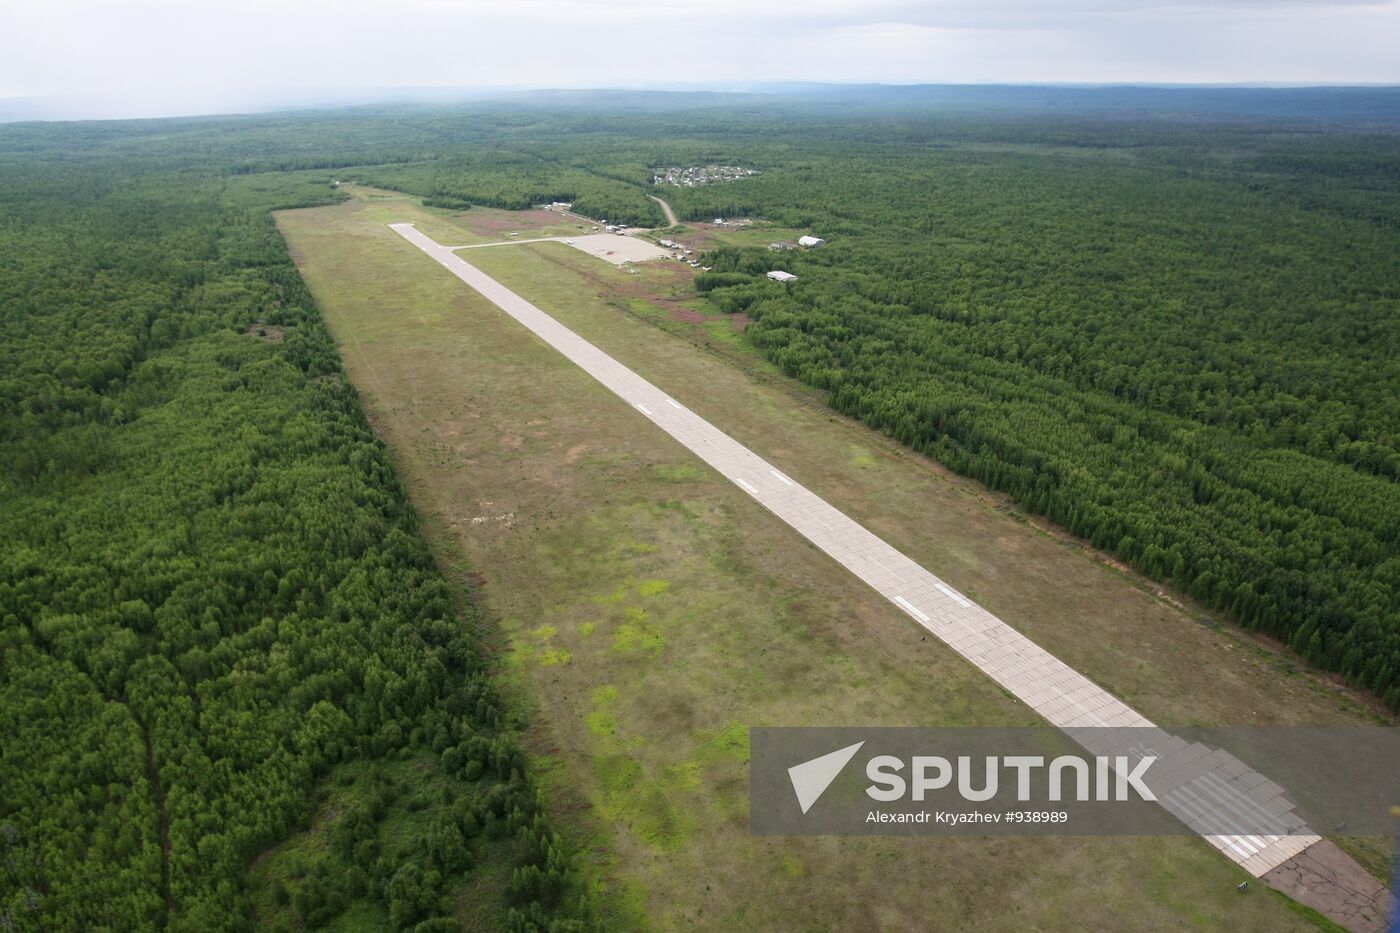 View of runway at airport near the town of Kodinsk